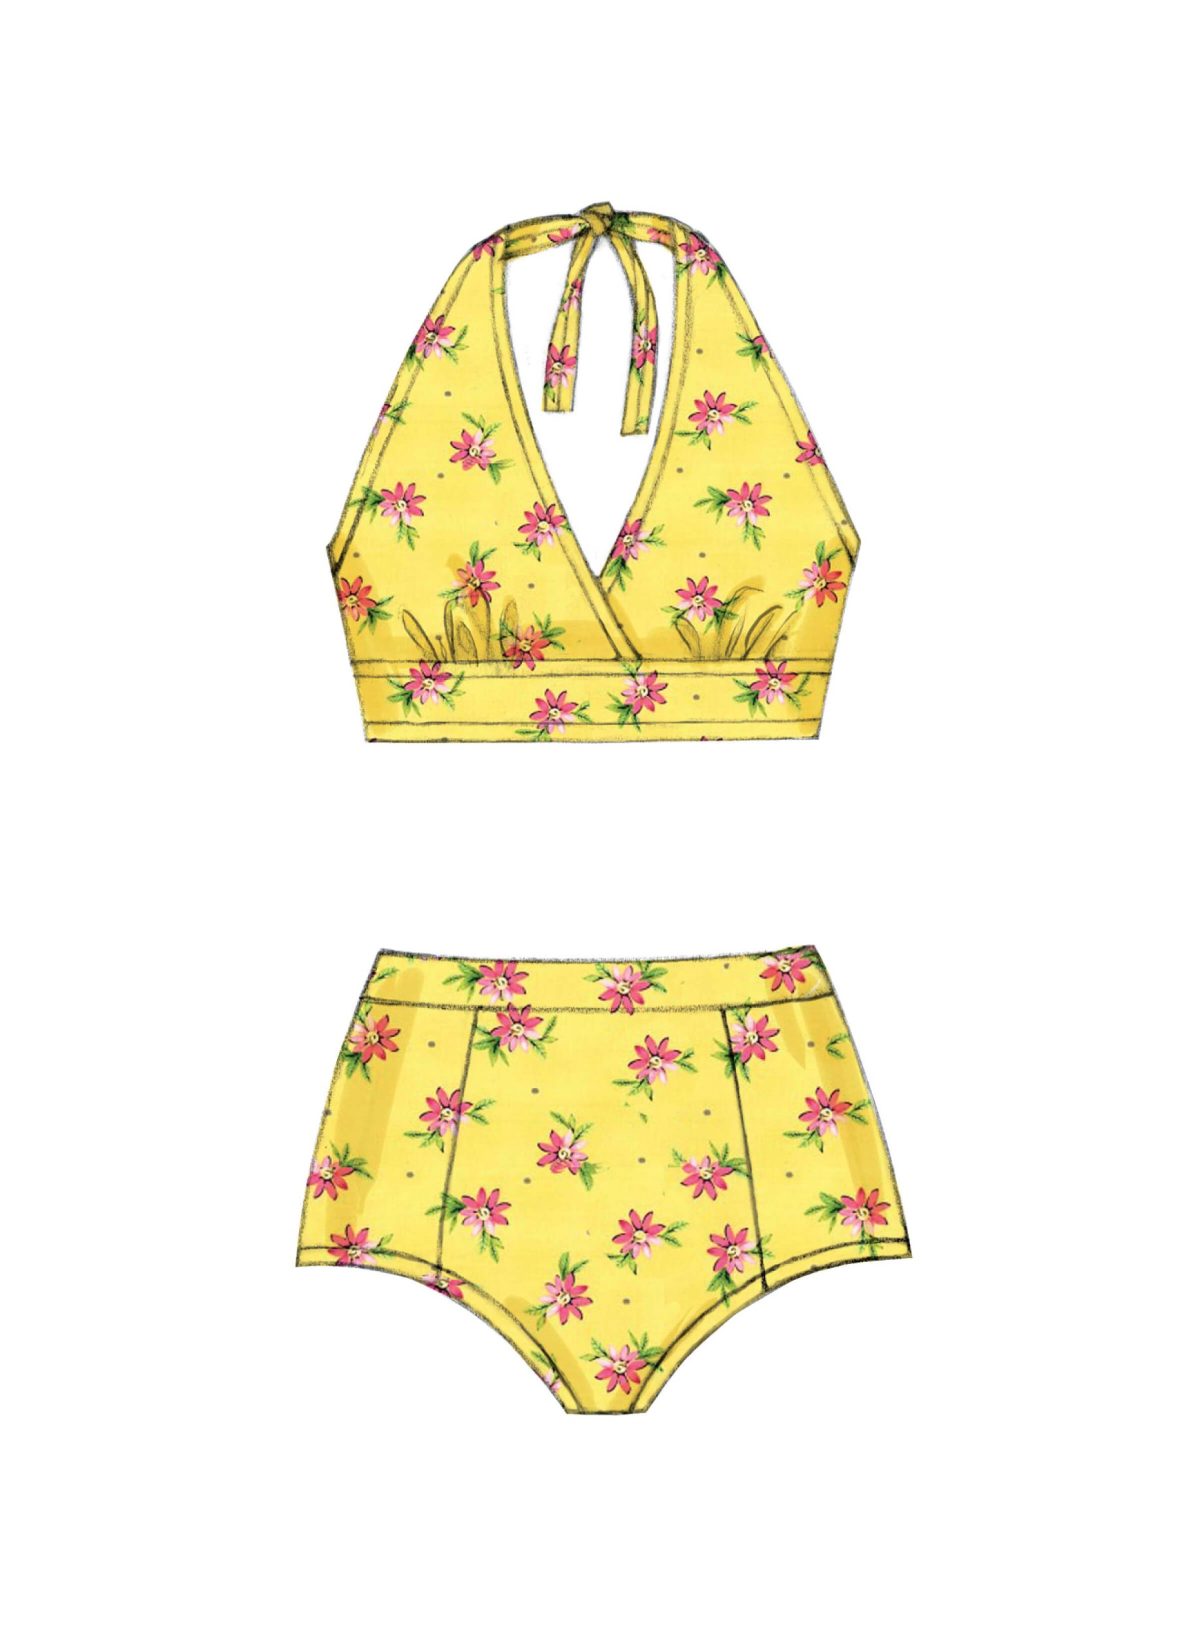 McCall's Sewing Pattern M7168 Misses' Swimsuits